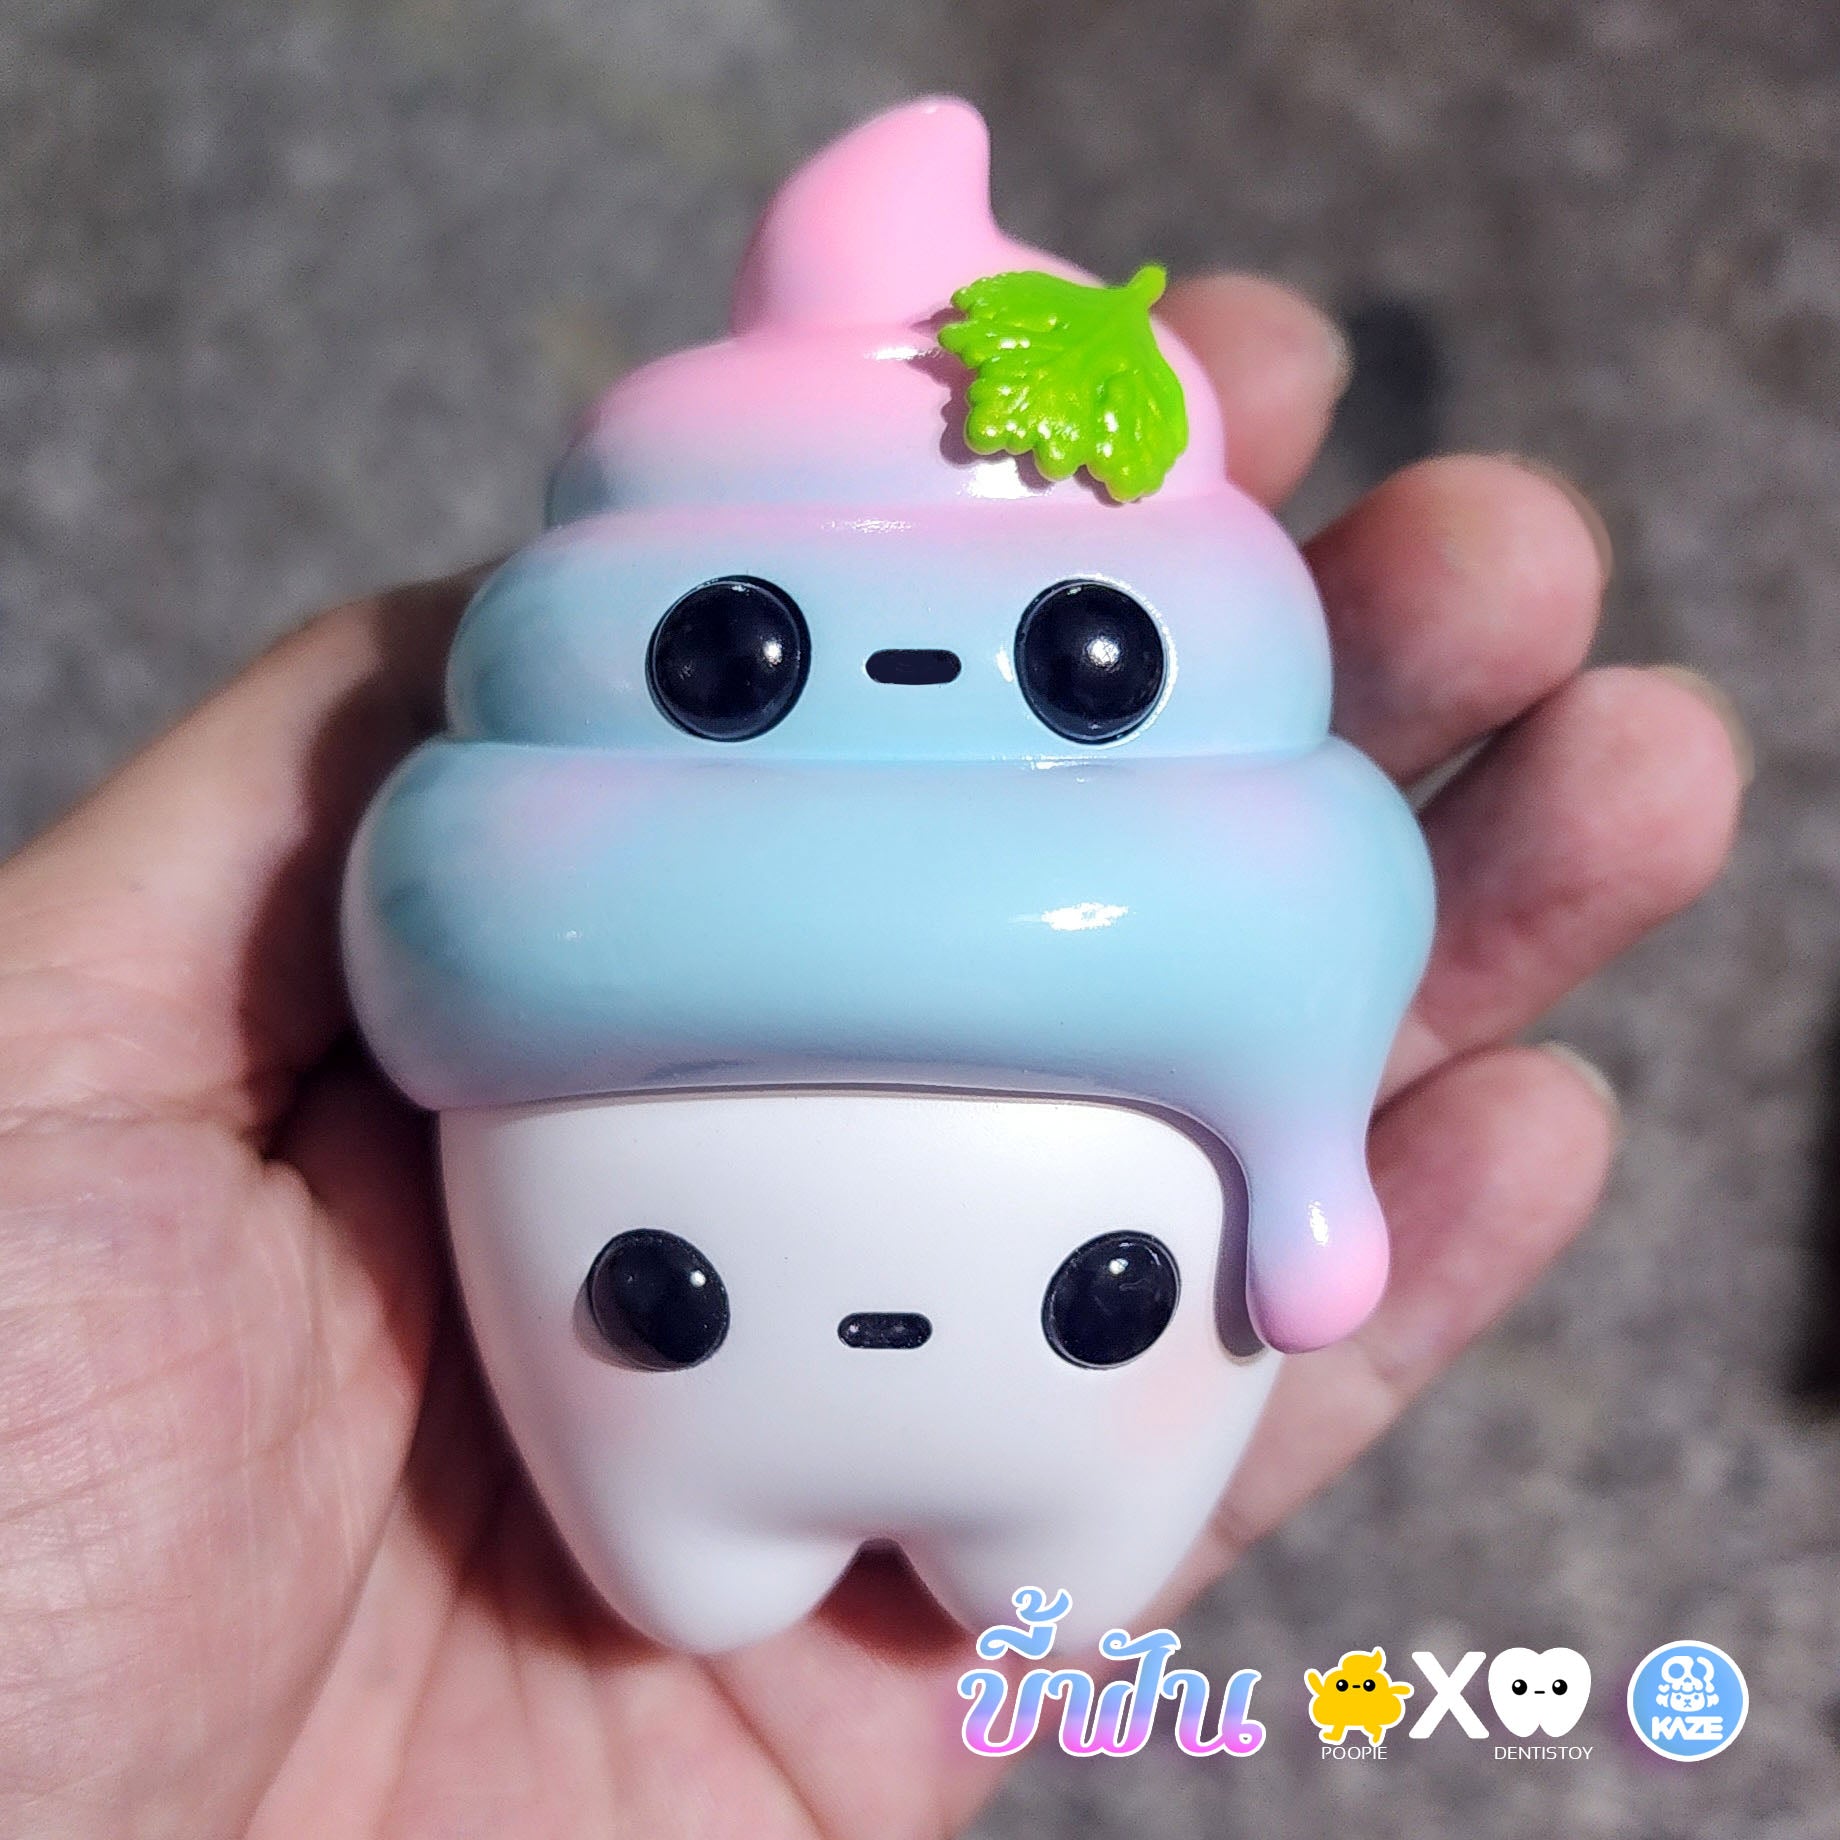 A hand holding a toy - Poopie X Dentistoy by Kaze Studio, limited edition handmade resin, 9.5 cm size.